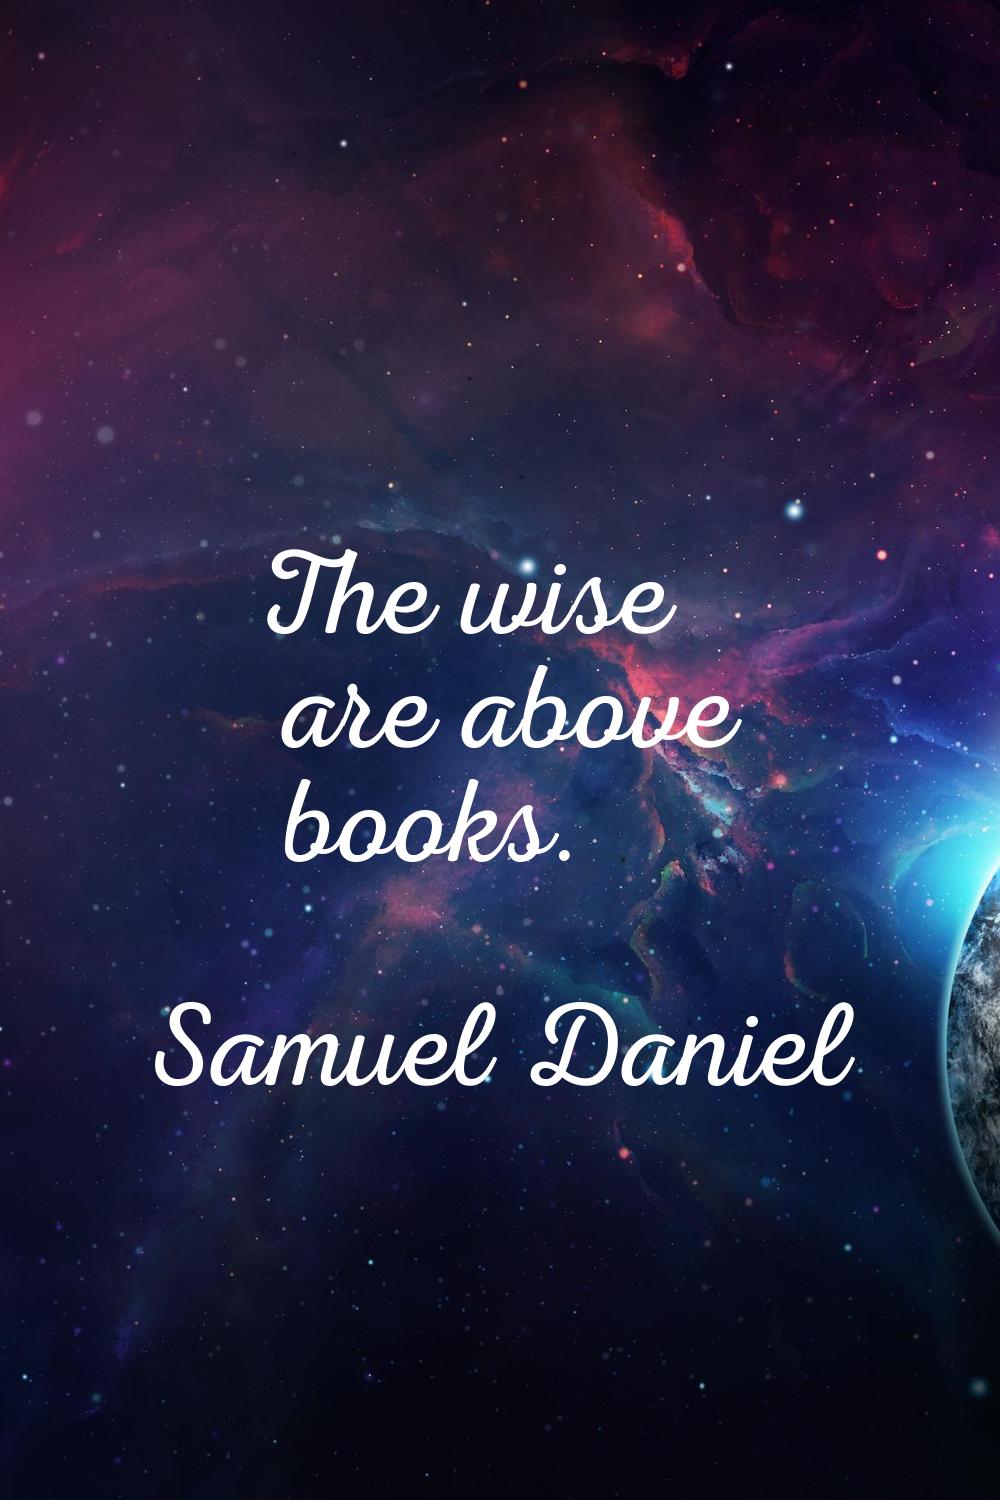 The wise are above books.